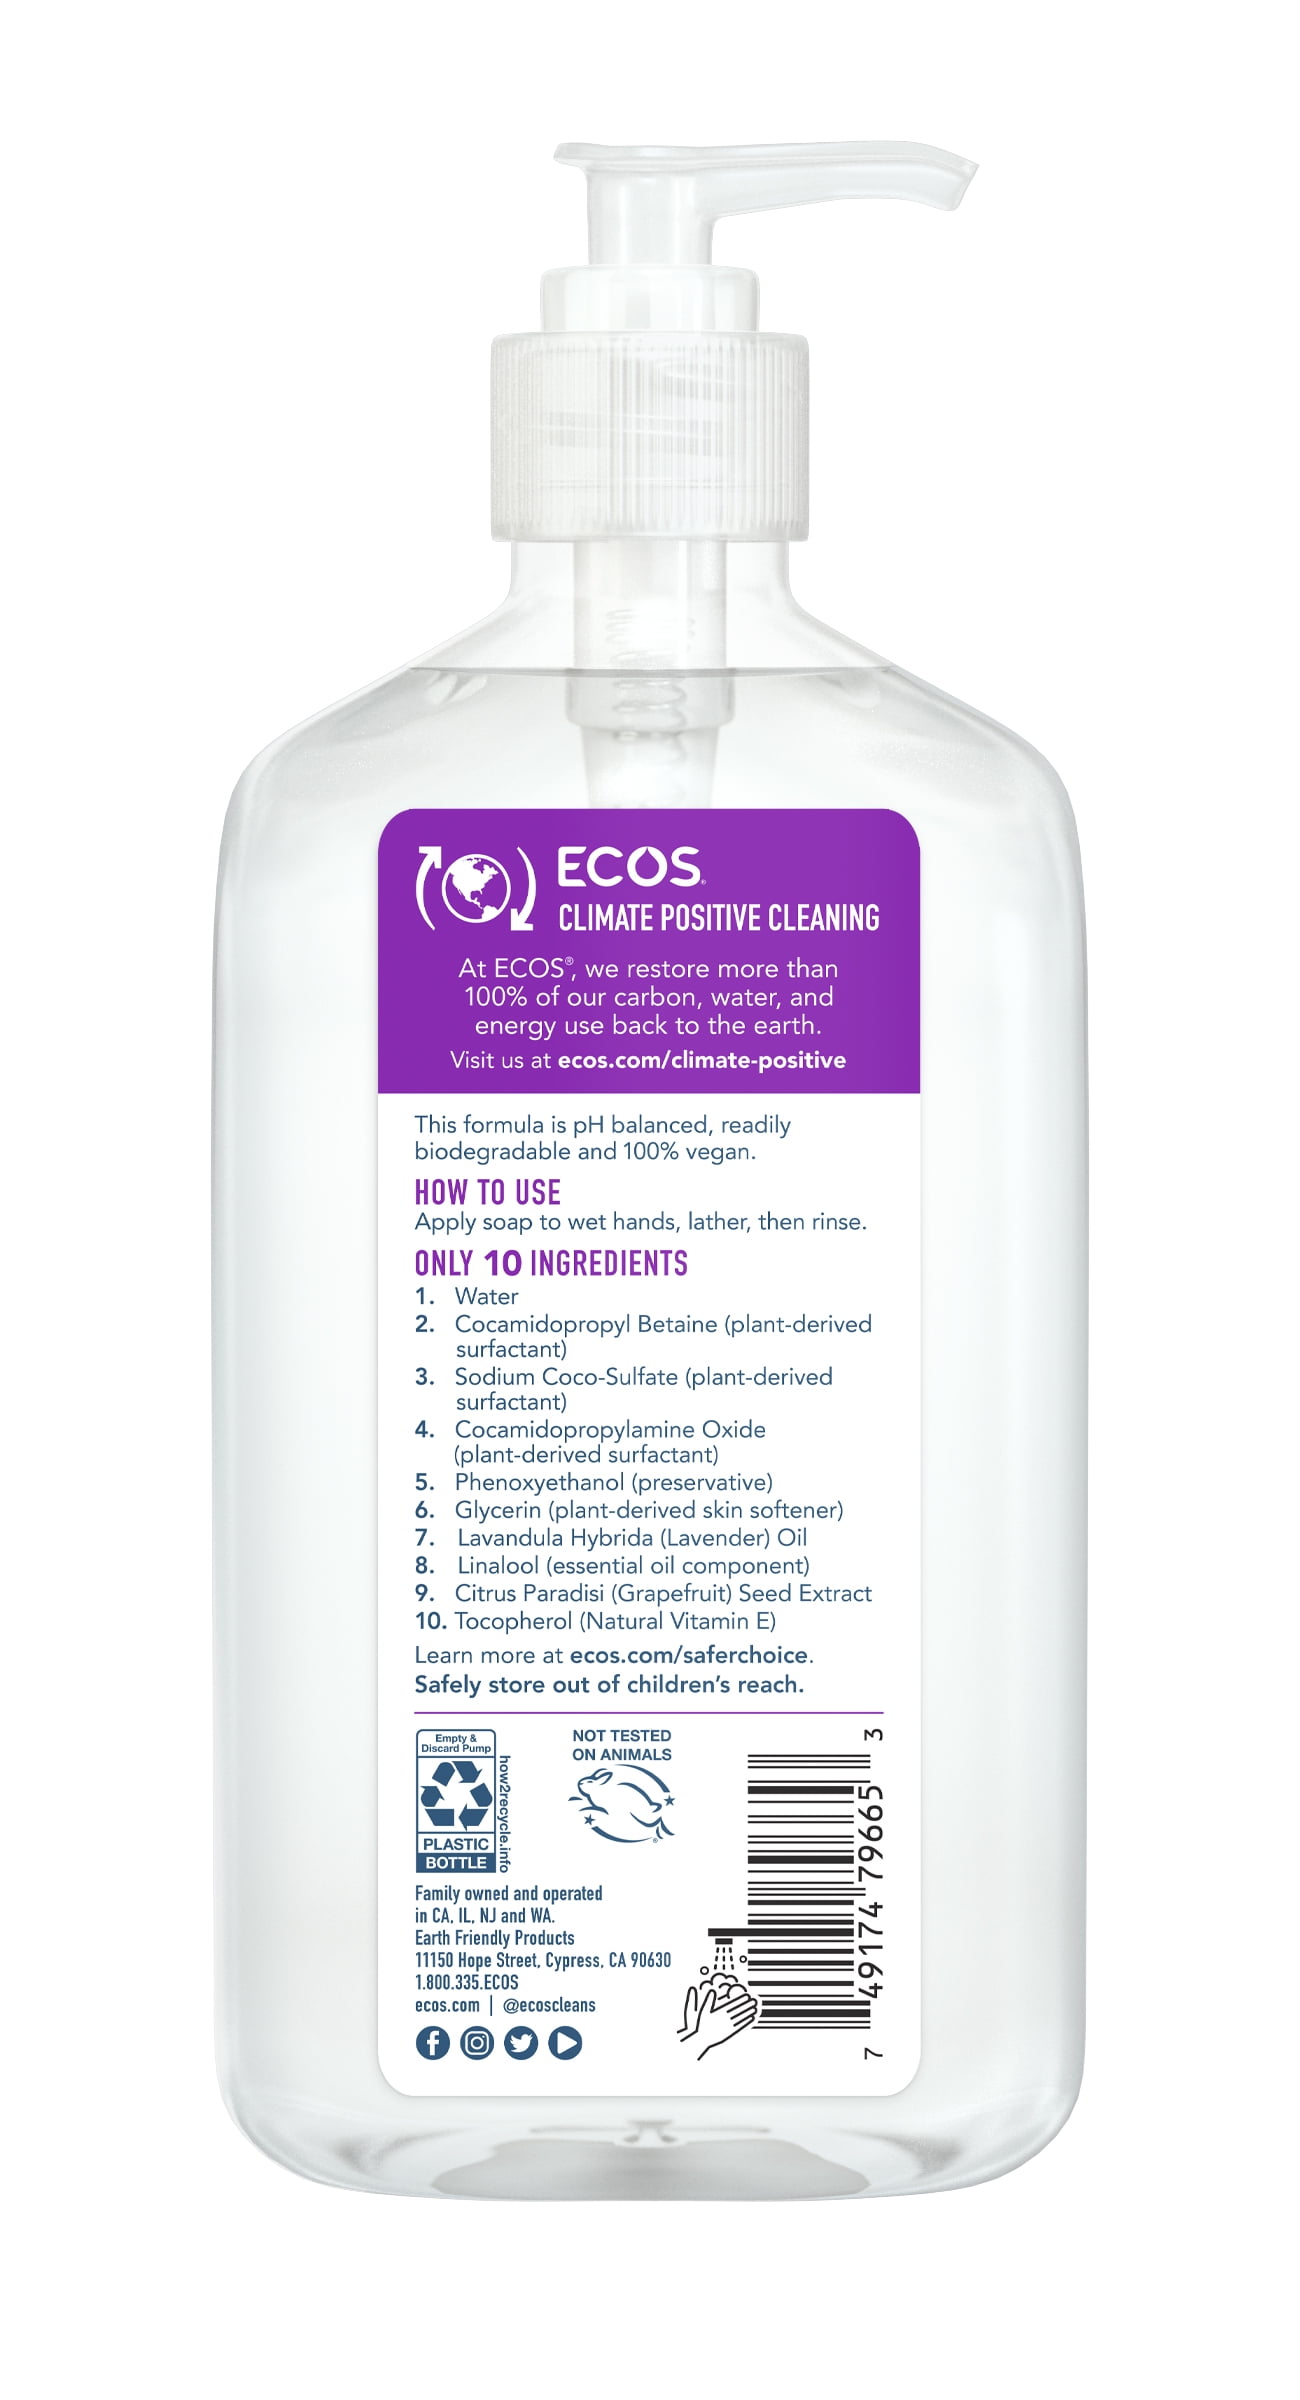 Organic Cleaning Product in Lavender Kiss (32oz)